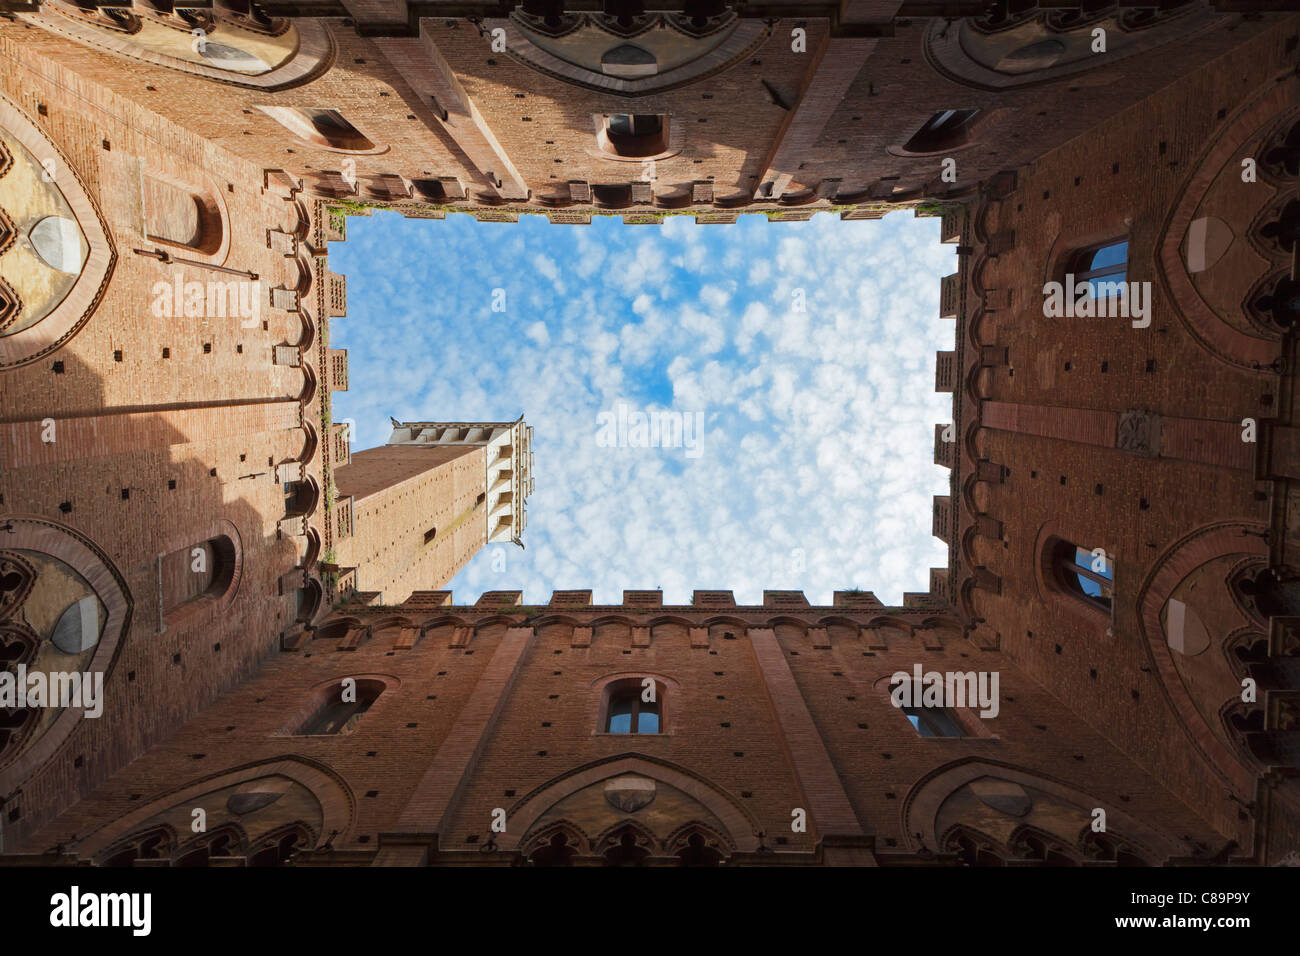 Italy, Tuscany, Siena, Torre del Mangia, Upward view of Palazzo Pubblico from courtyard Stock Photo